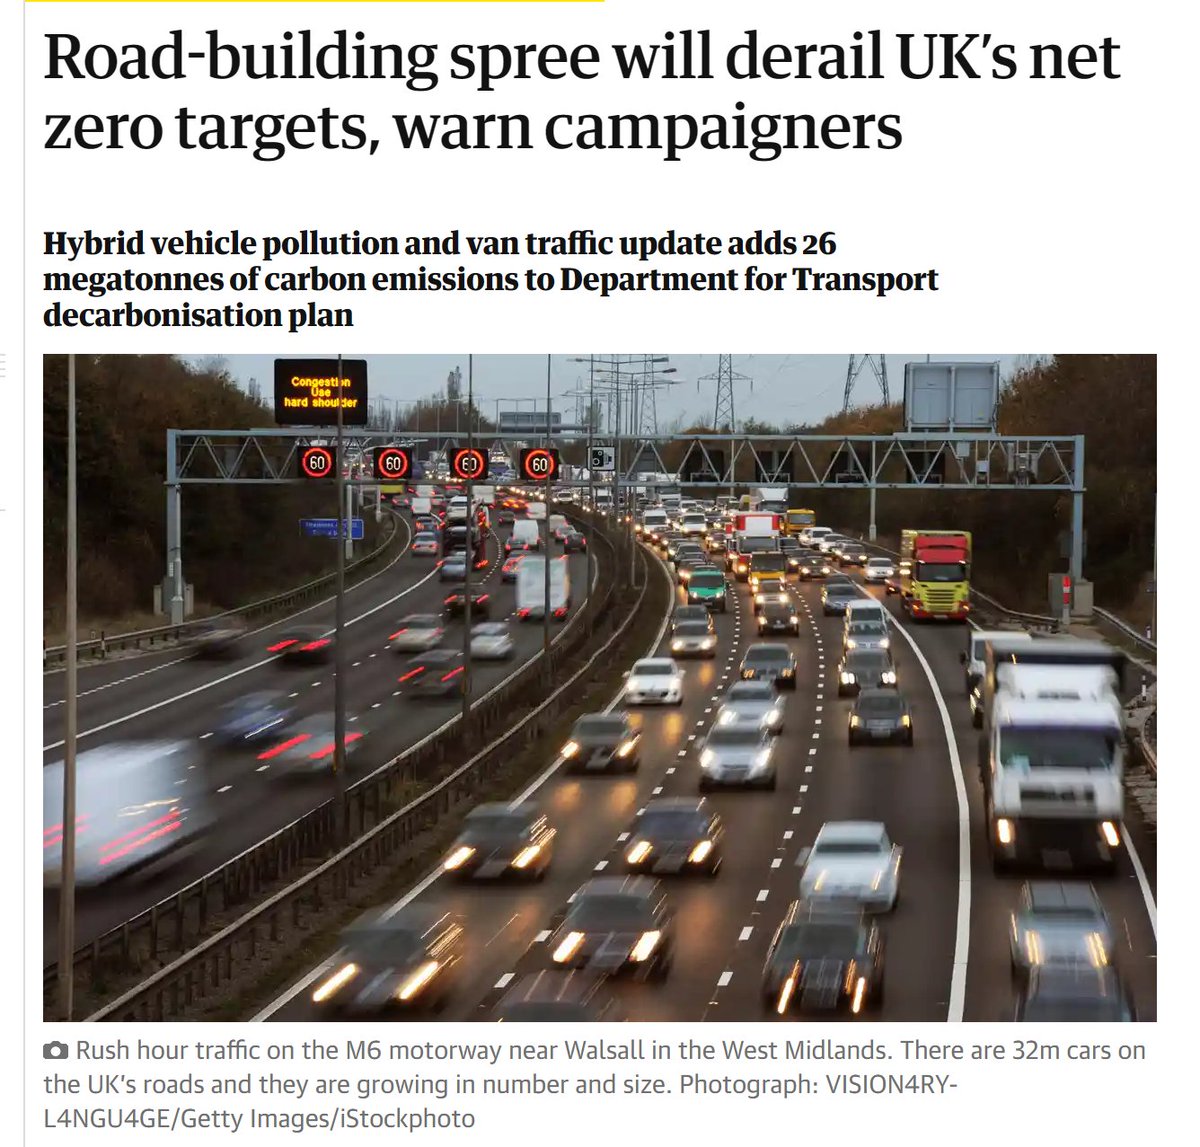 On Wednesday @theCCCuk will publish its latest report on the UK’s progress towards net zero.

According to @RHarrabin it will recommend a ban on any new developments that make climate breakdown worse.

Makes me wonder if the government's £27bn roadbuilding plans will draw flak.